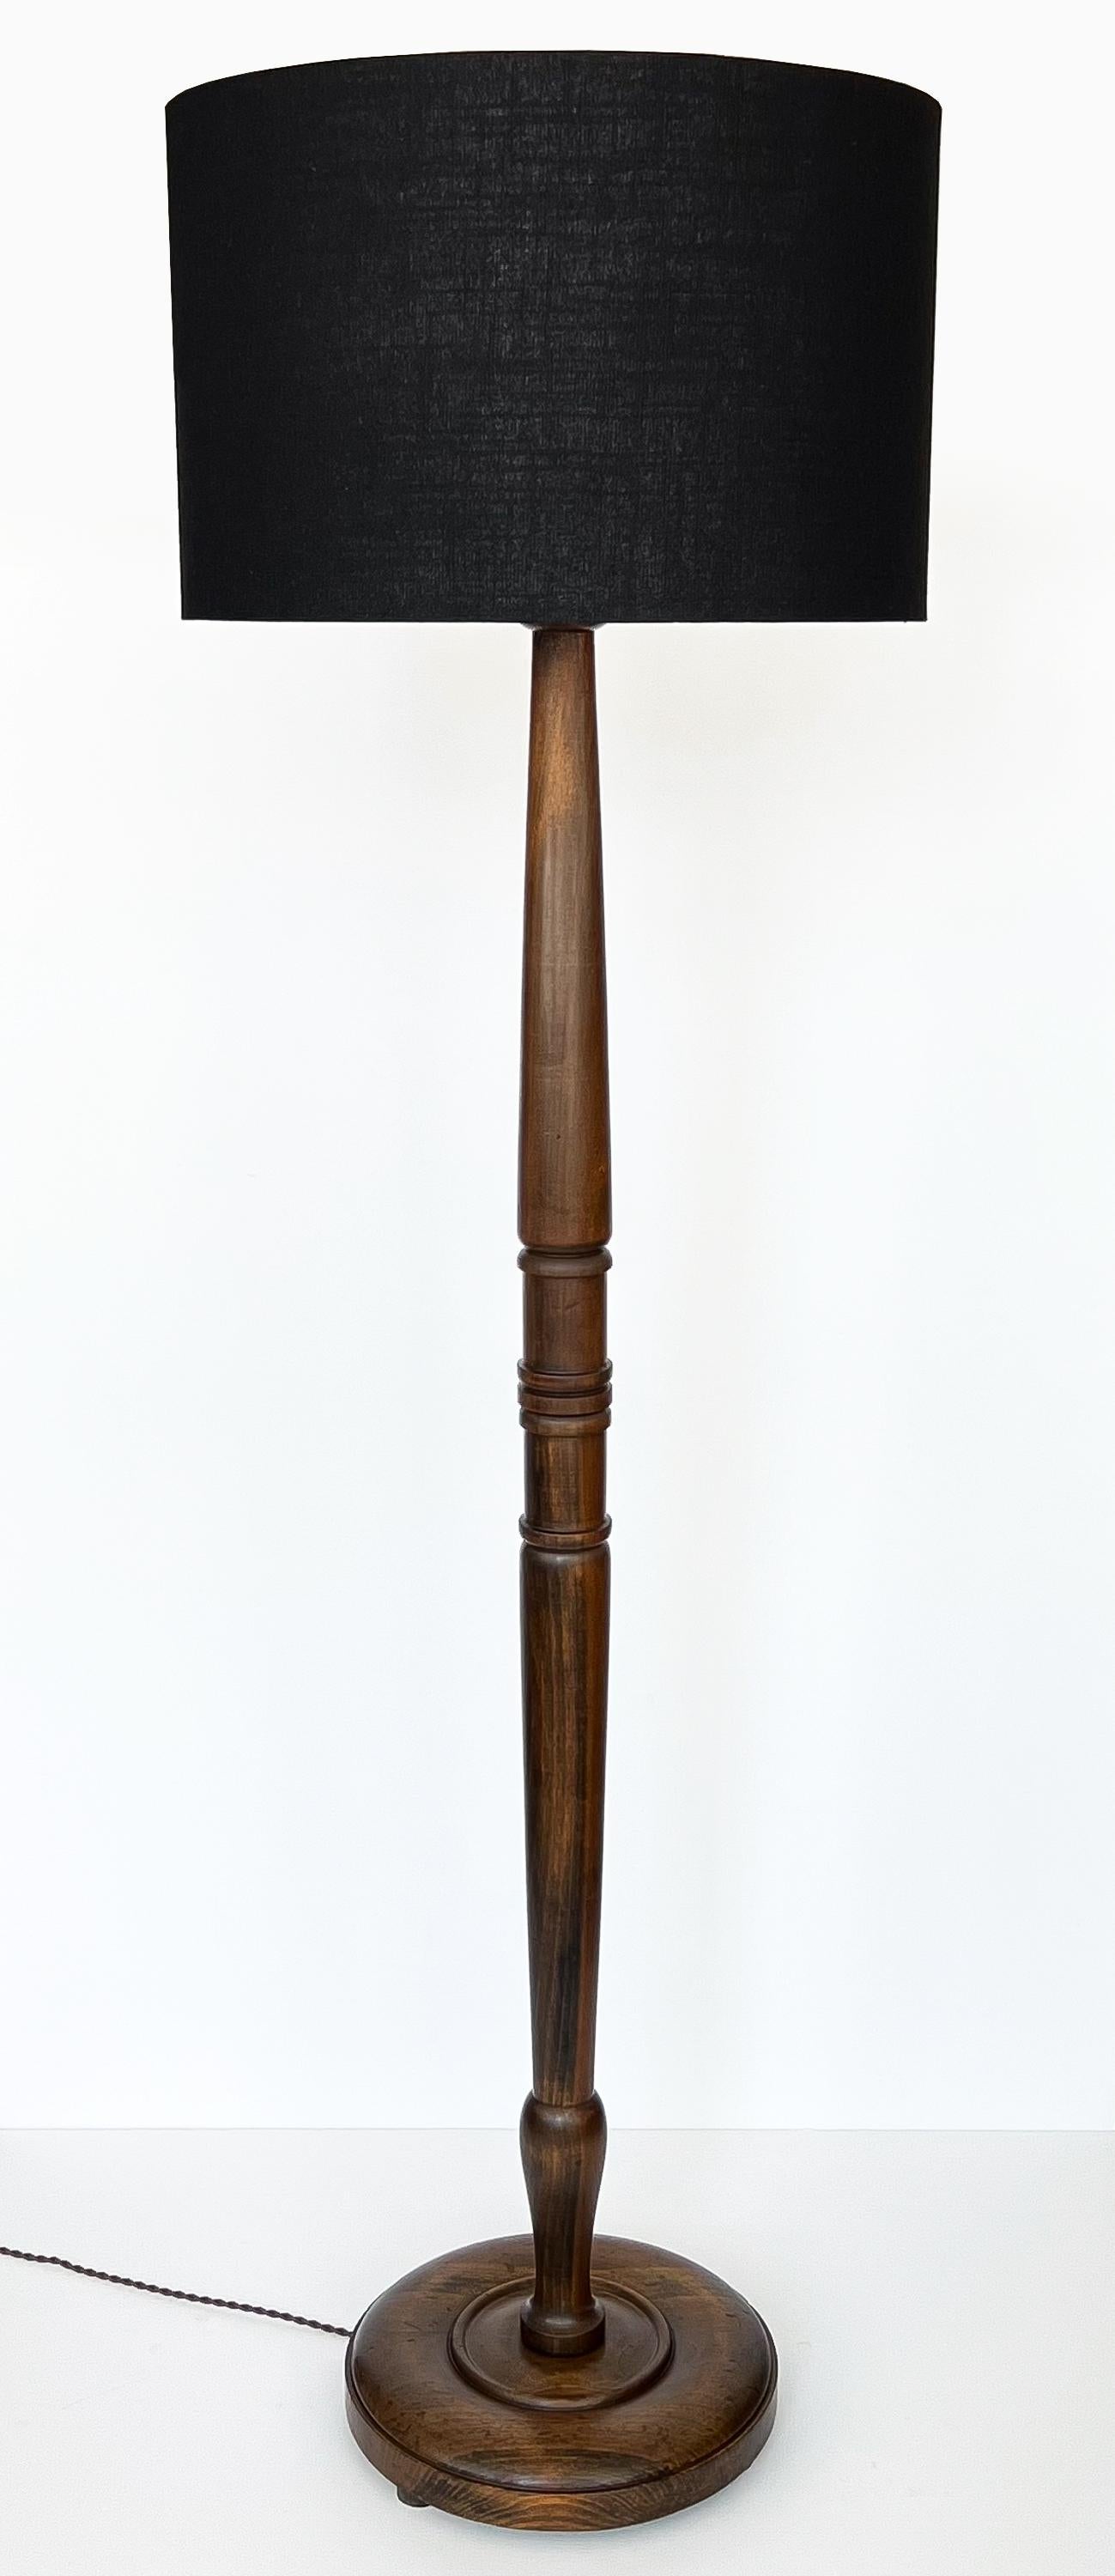 An antique English hand-turned solid wood floor lamp, circa early 20th century. Turned wood column and round 13